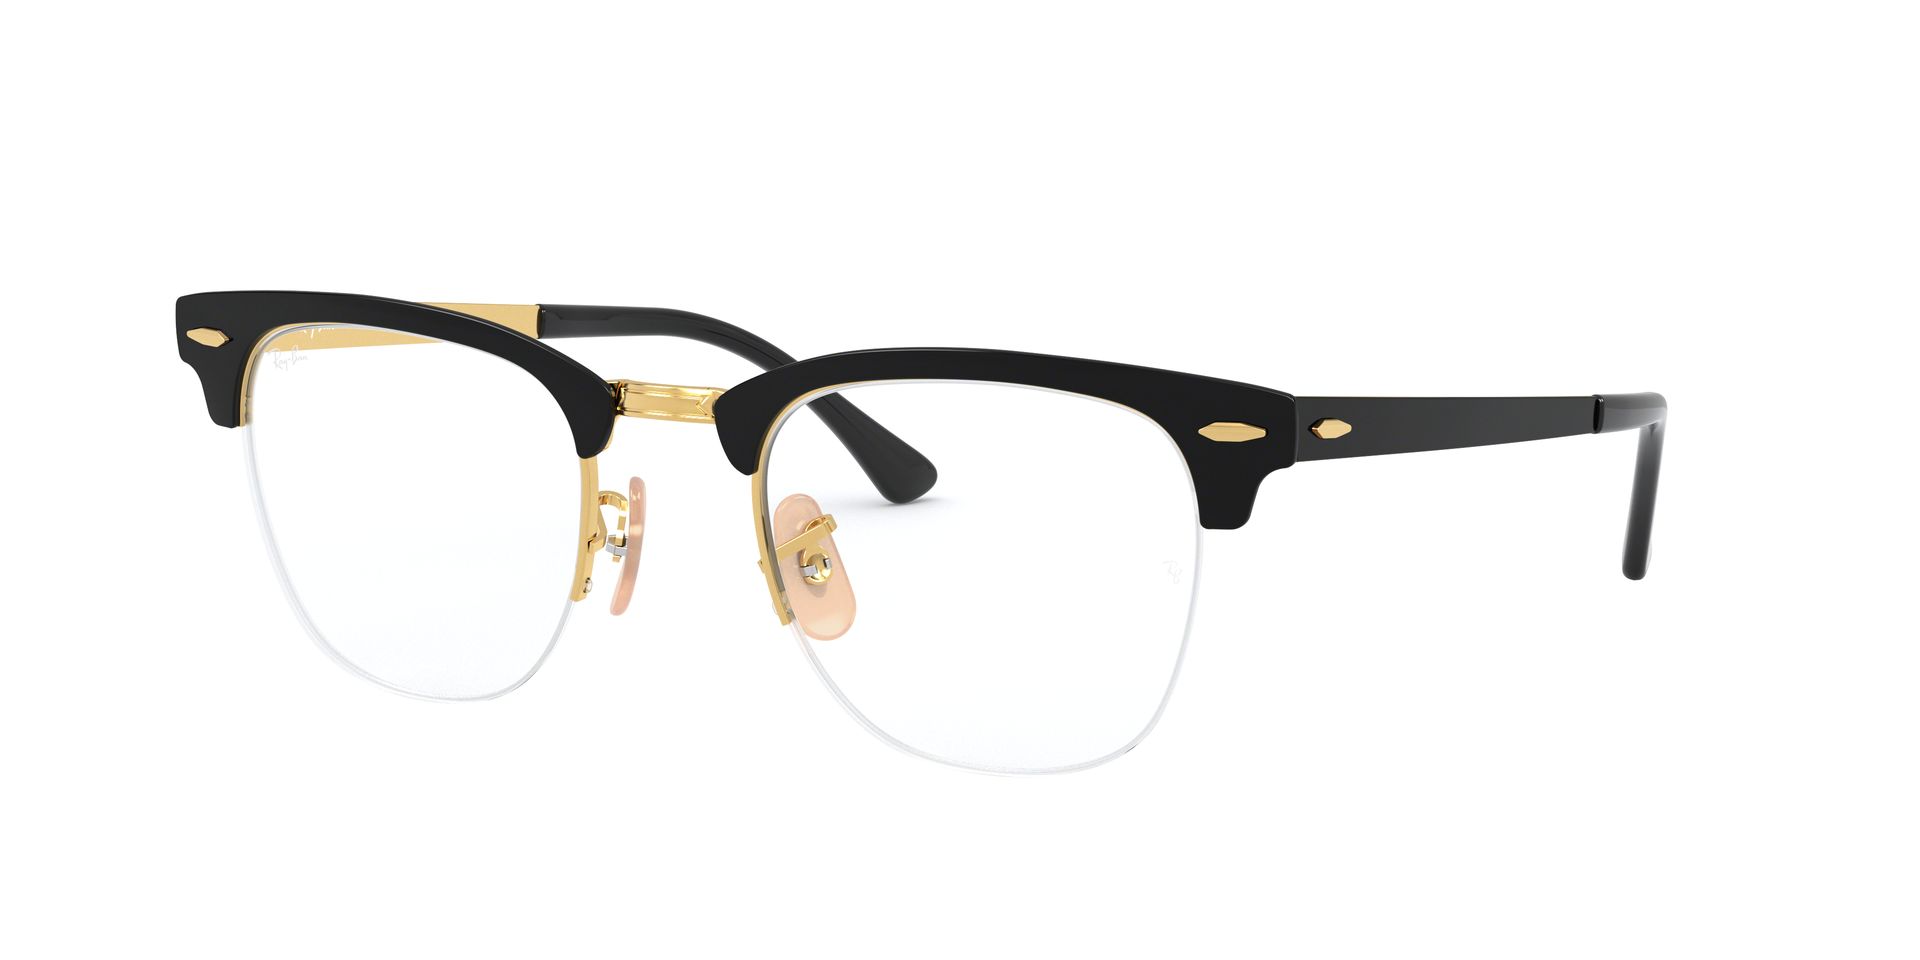 35  How much do ray ban prescription glasses cost for Men